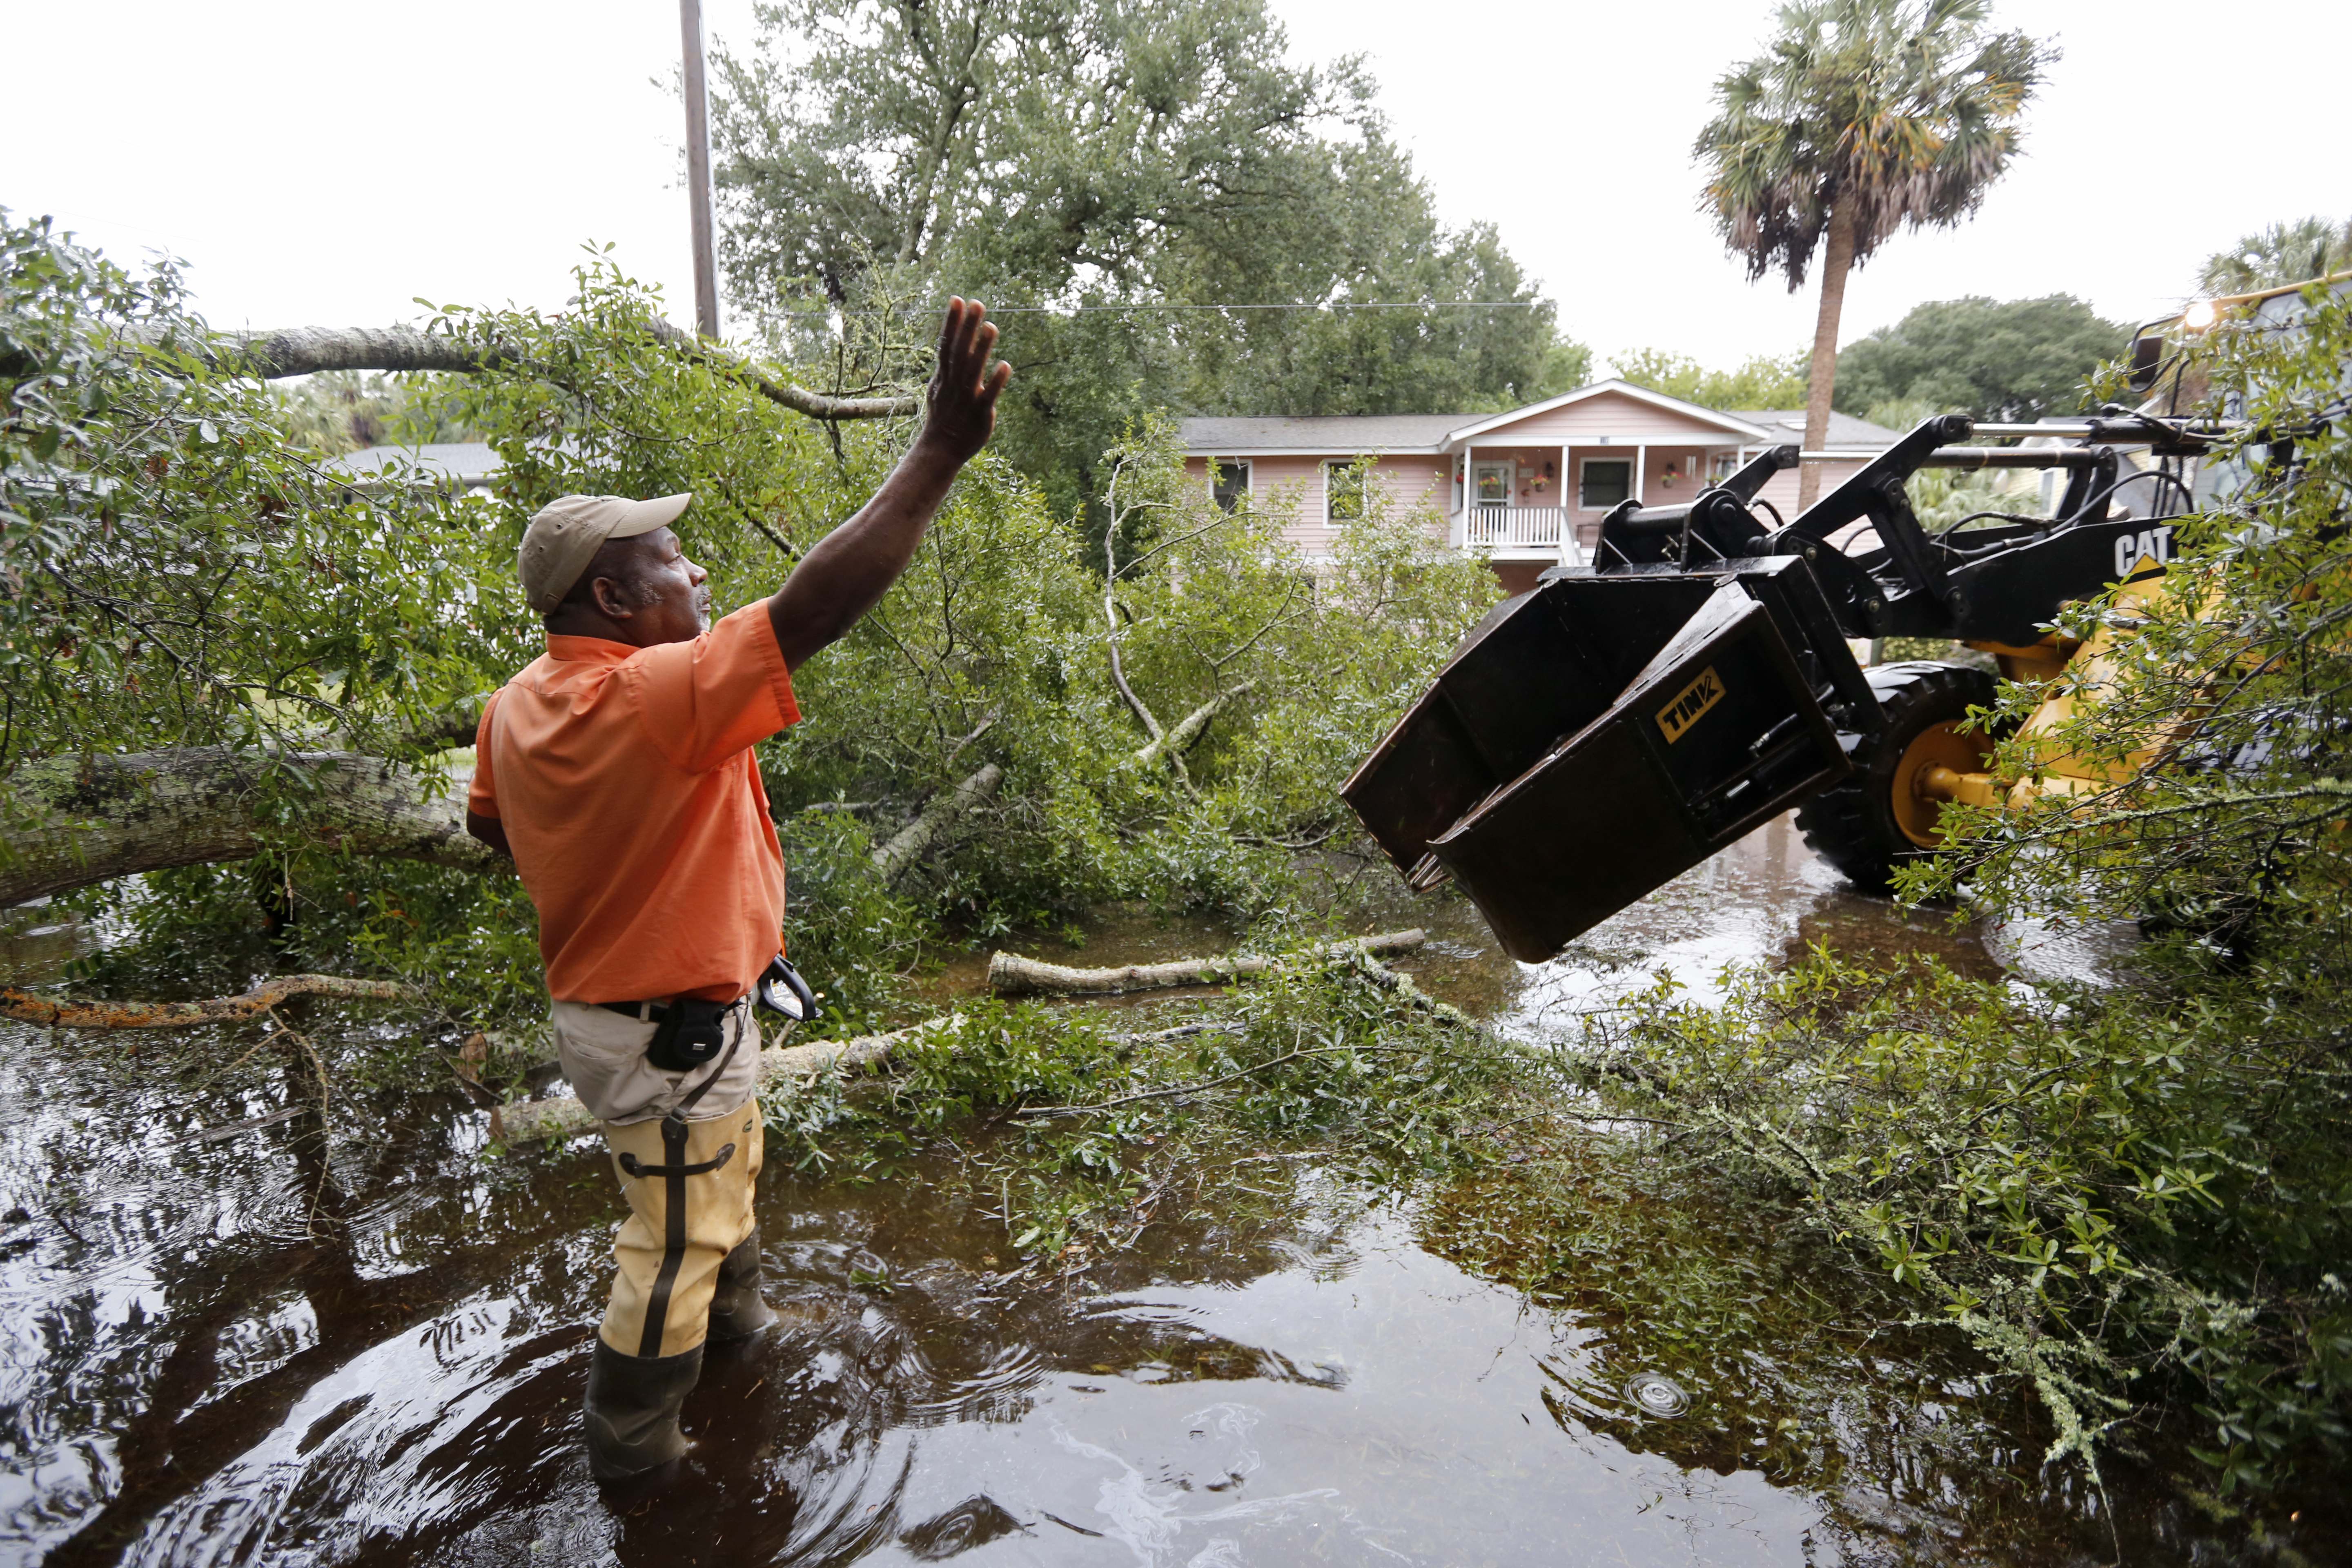 George Myers with the city of Isle of Palms directs equipment in on 23rd Ave. to clear the road after heavy rains fell on the Isle of Palms, S.C., Sunday, Oct. 4, 2015